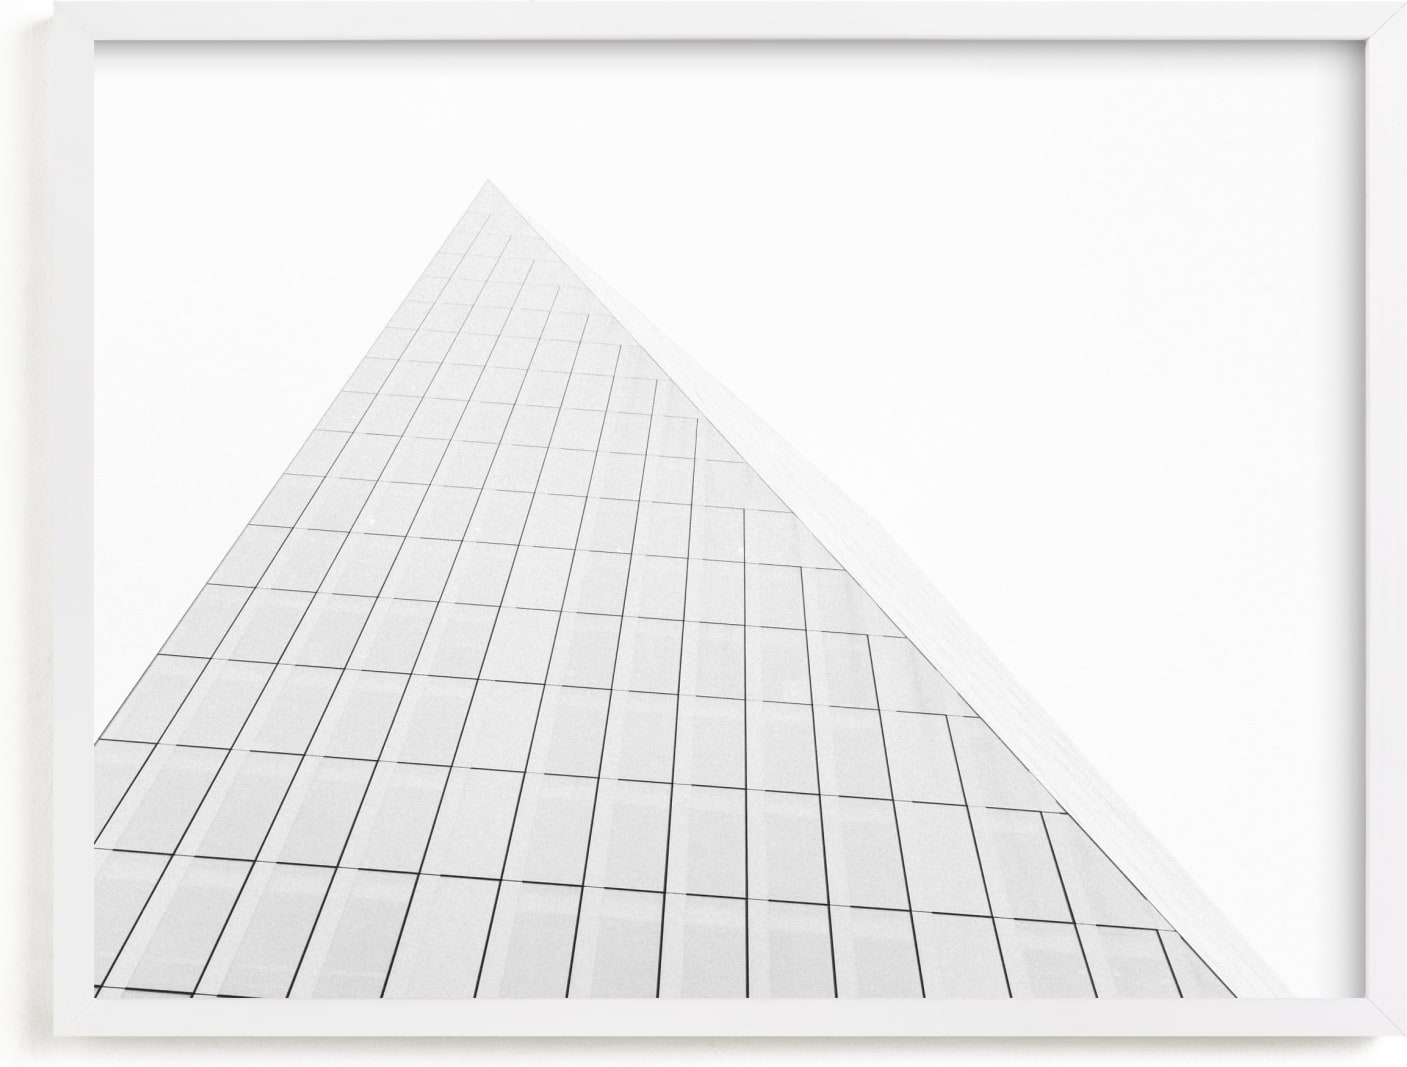 This is a black and white art by Anna Western called Pyramid Building.